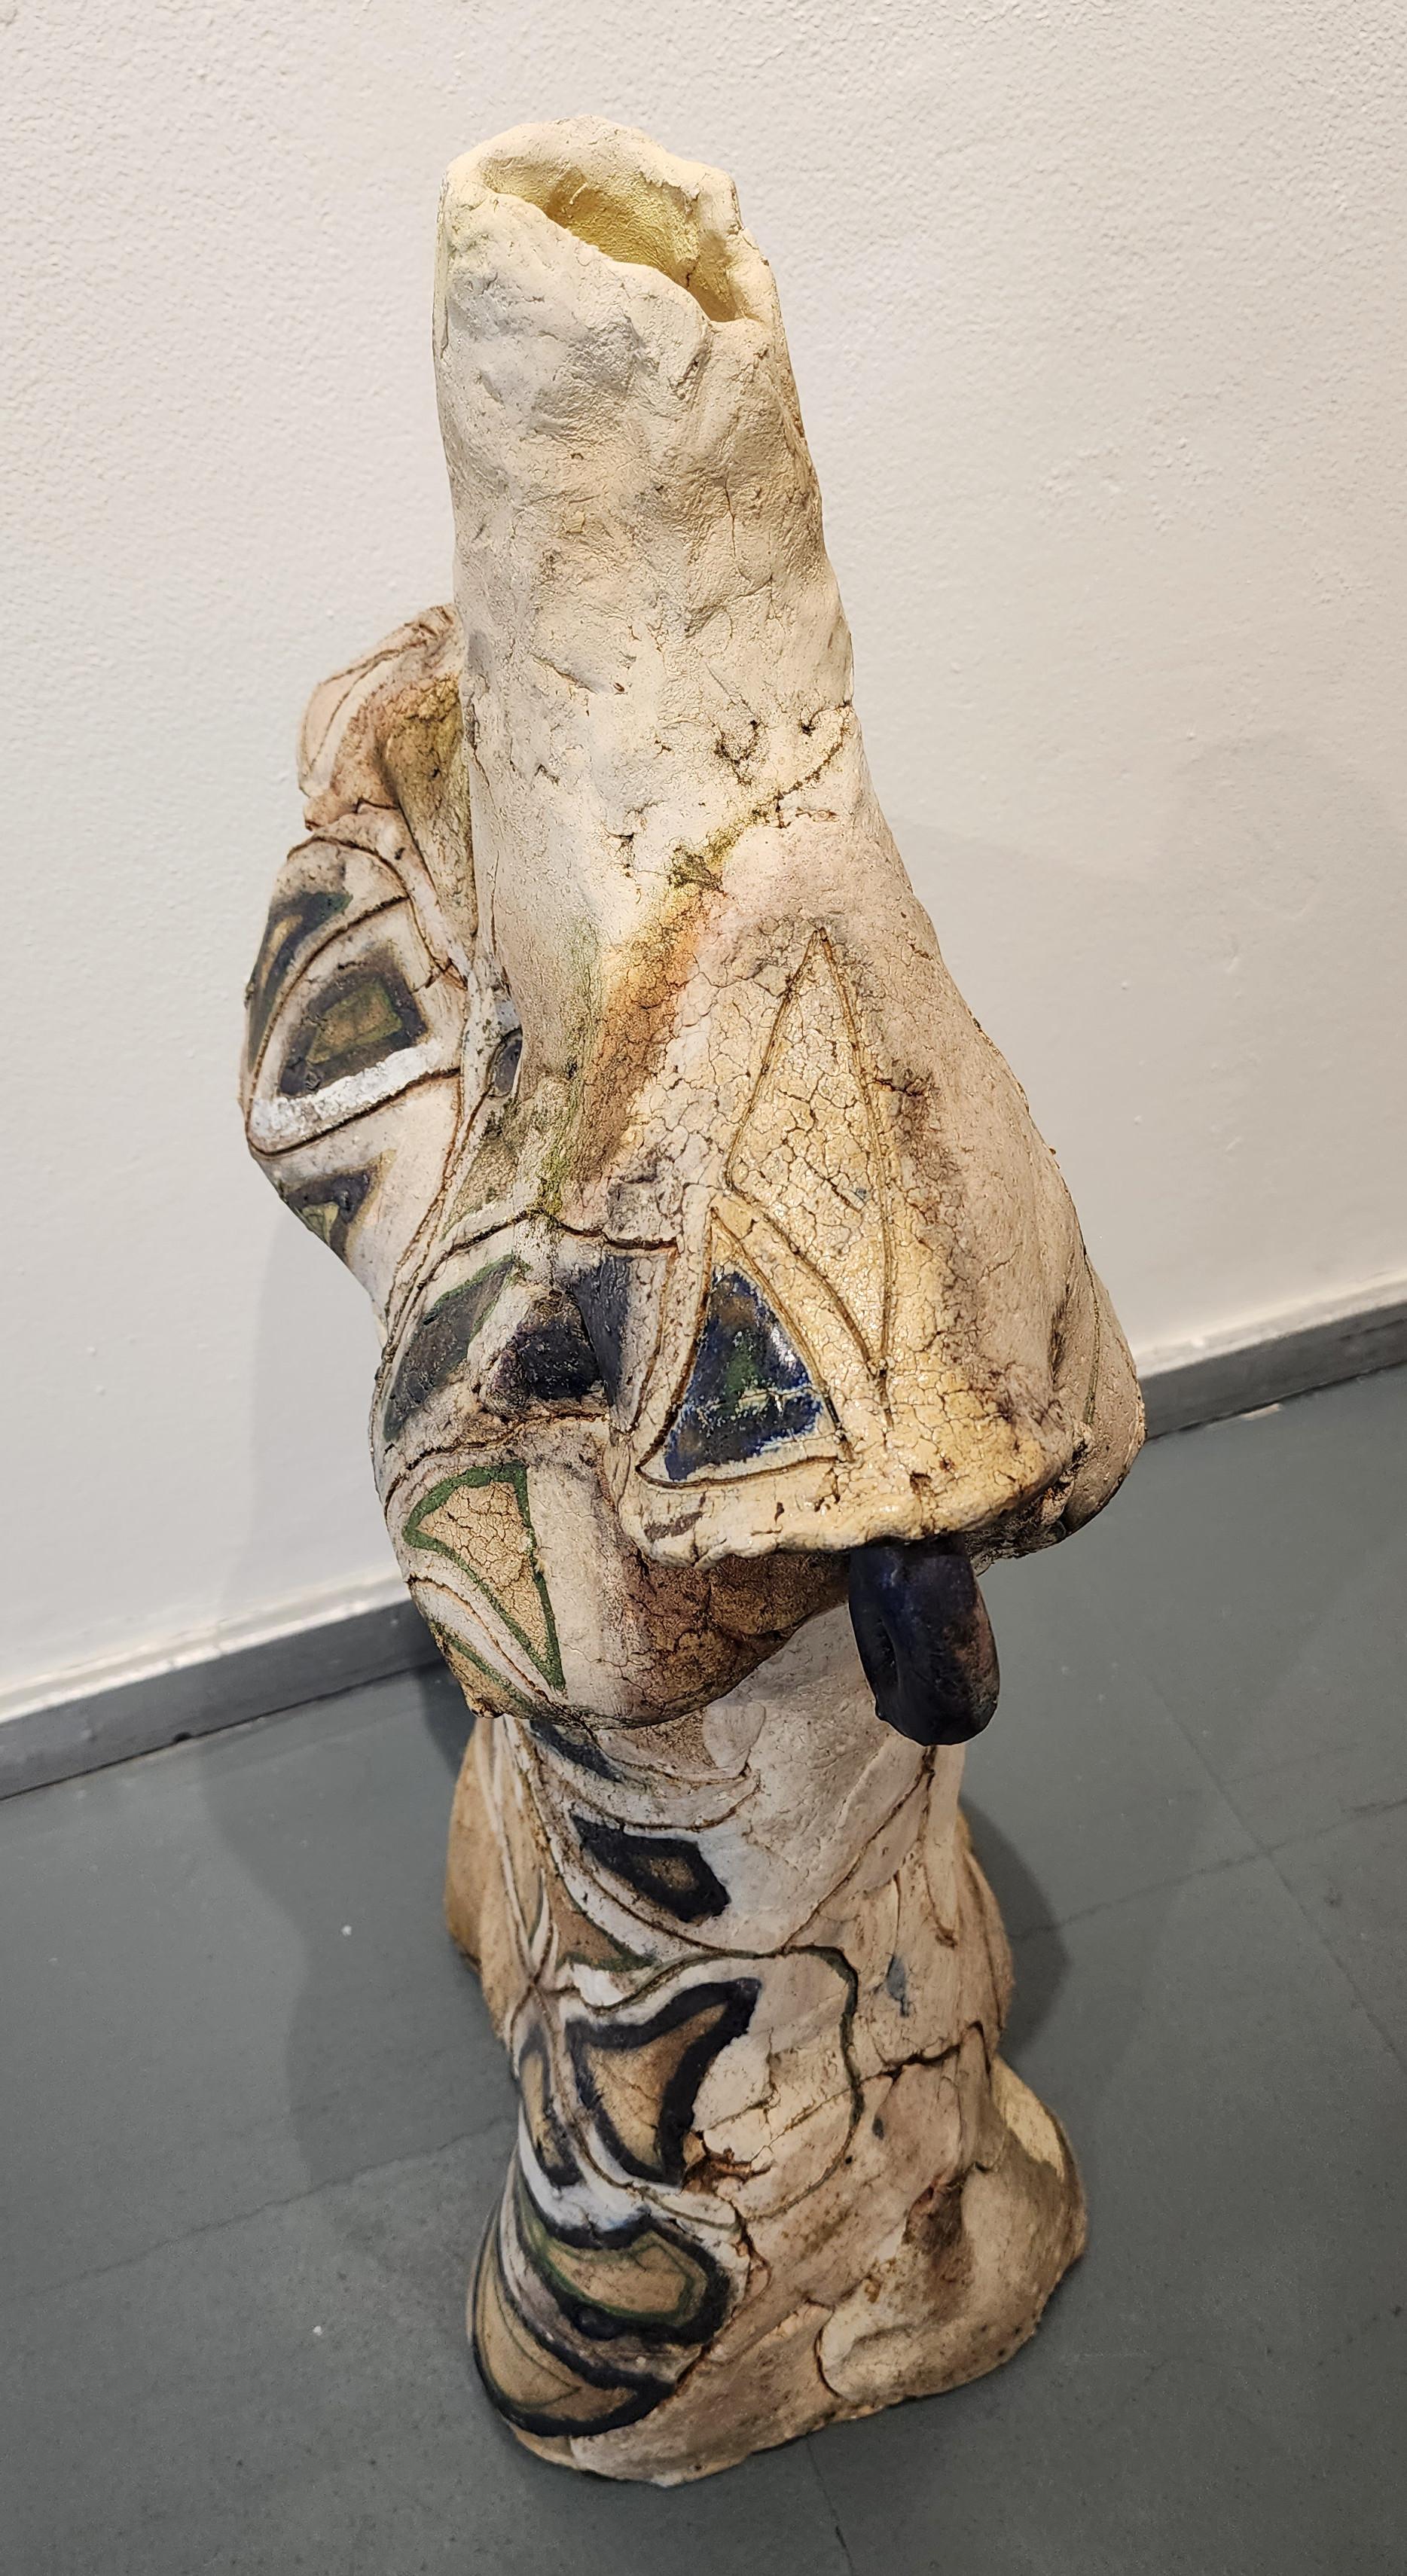 Jim Leedy
“Torso Vessel”
(Fish Head Woman)
Stoneware Sculpture, Glaze
Year: 1979
Size: 34.75 x 16 x 11
Signed
COA provided
Ref.: 924802-1364

Jim Leedy was an international artist in terms of his interests and achievements. He is an artist who